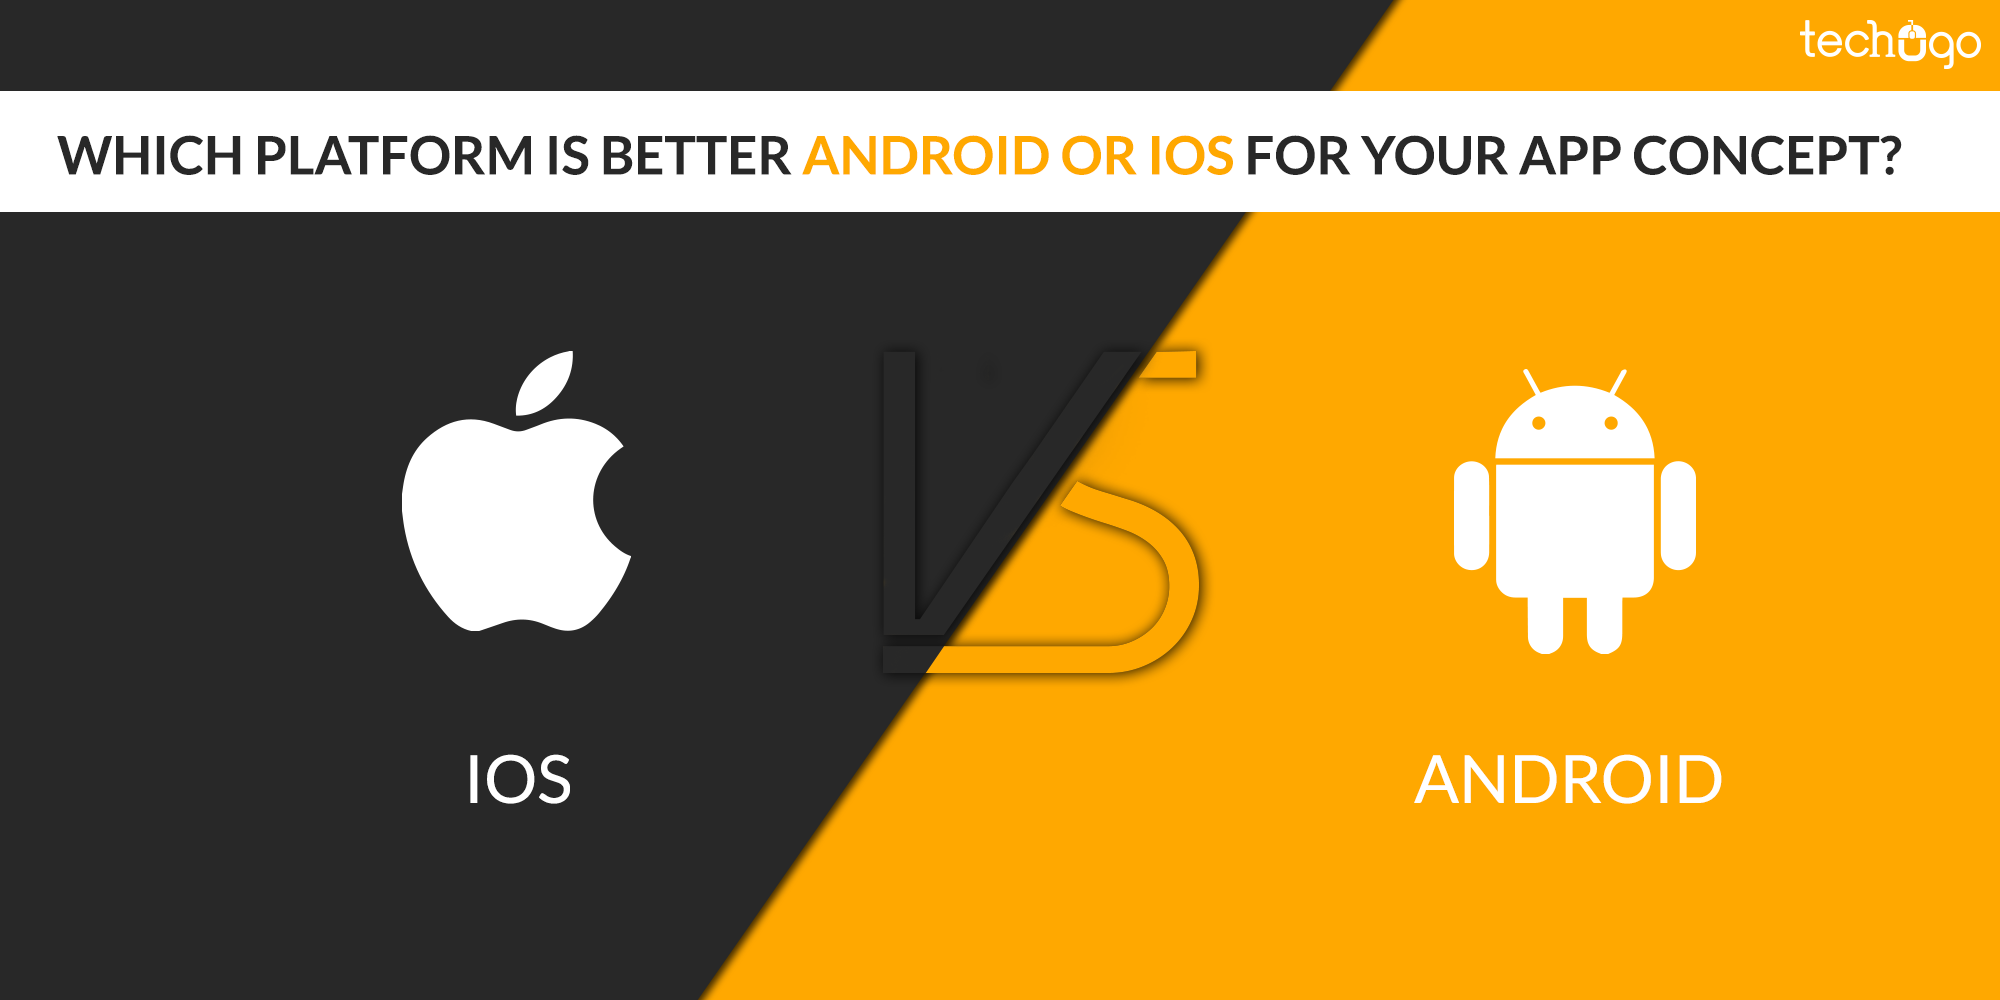 Which Platform Is Better Android Or IOS For Your App Concept?